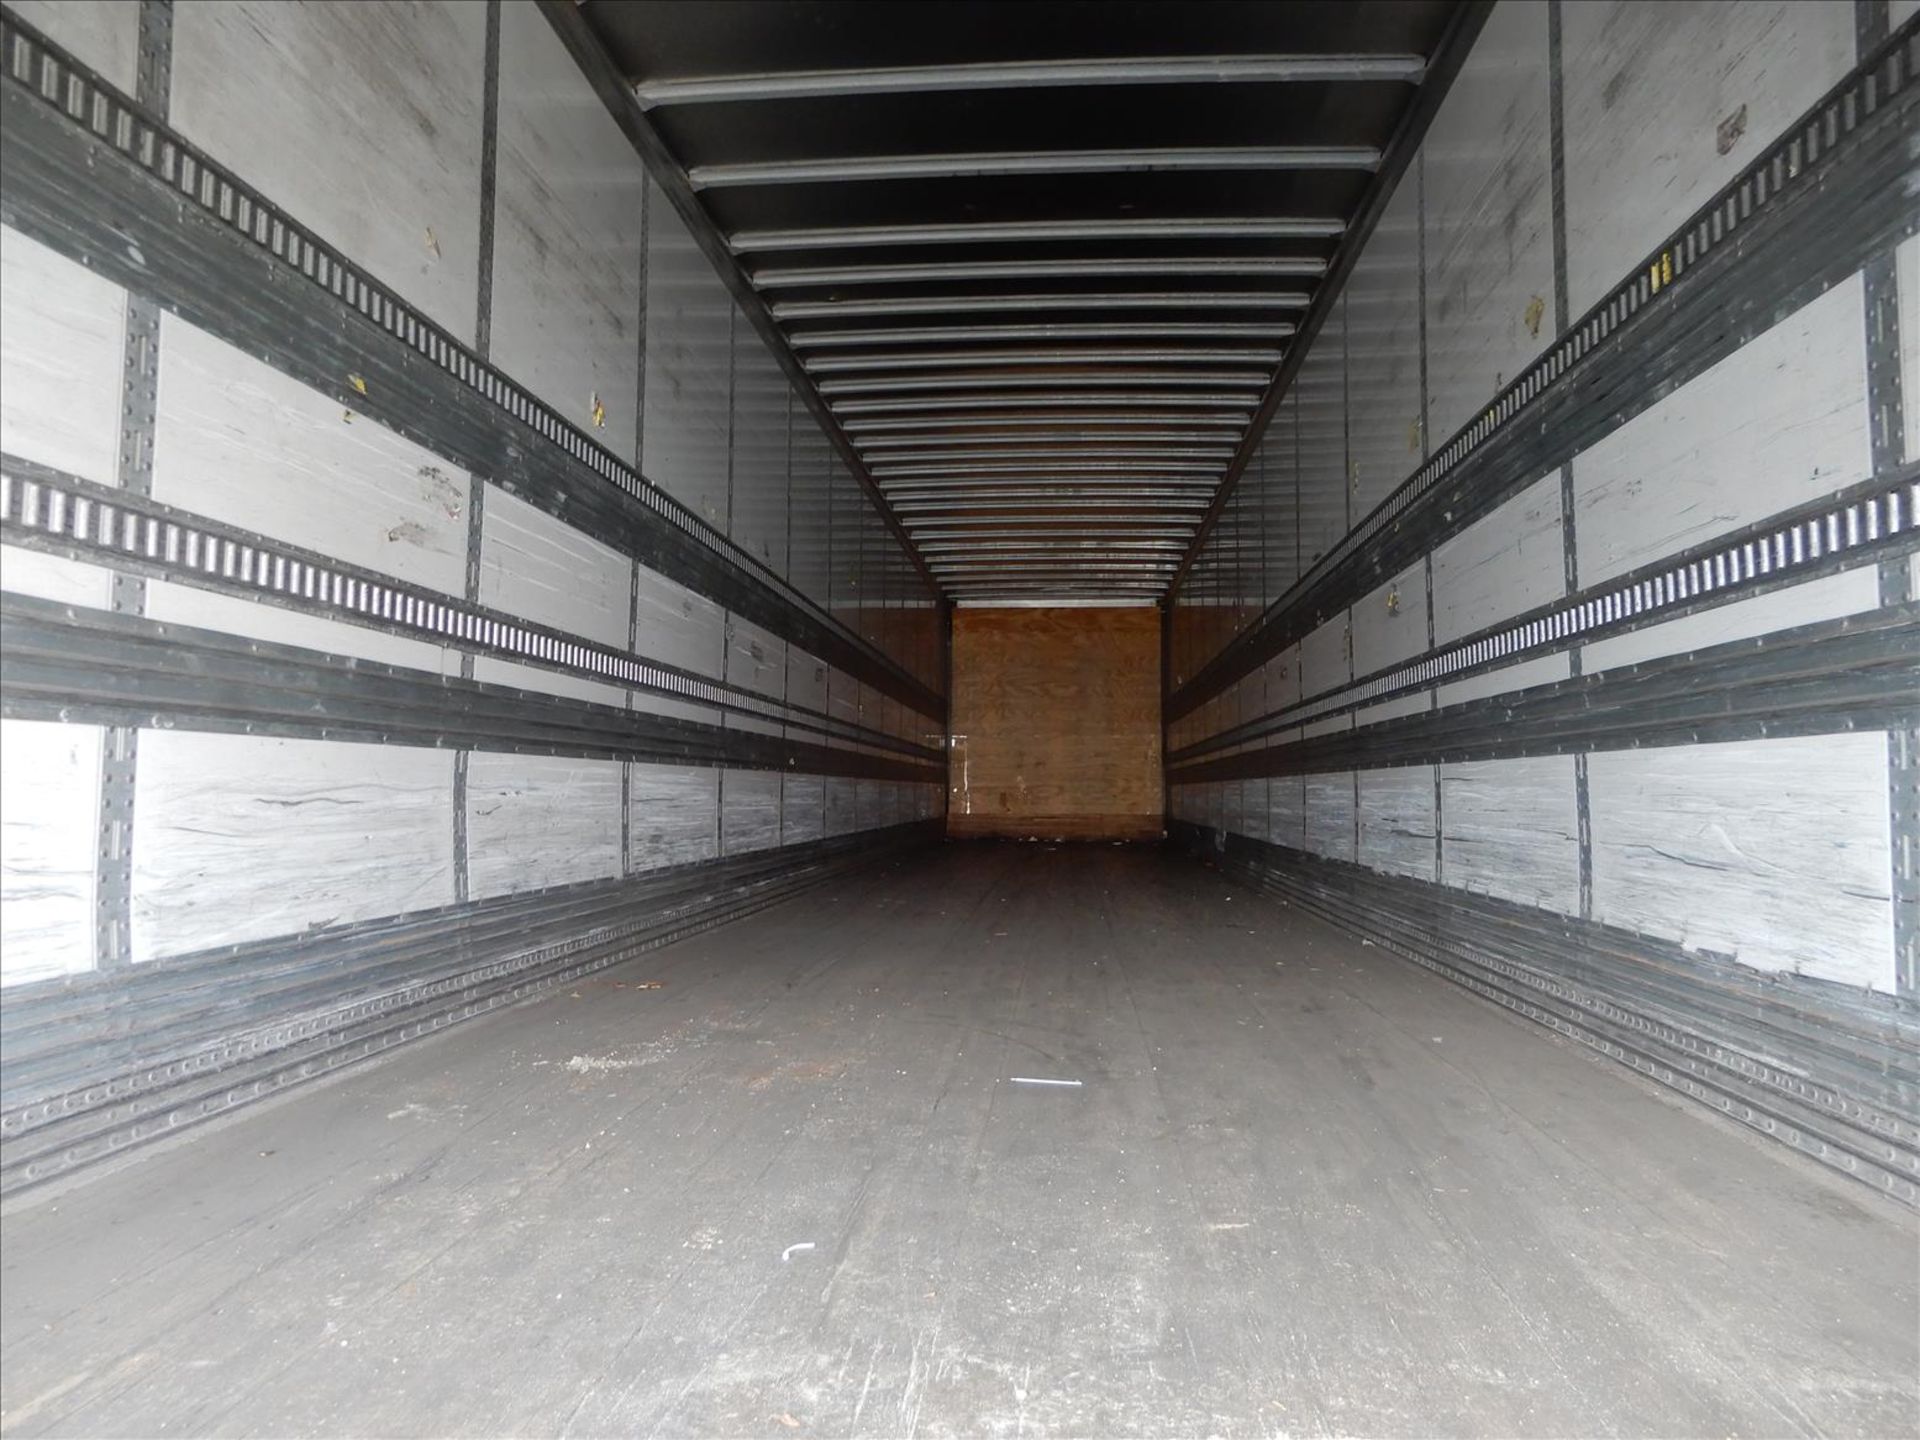 2012 Stoughton Trailer - Located in Indianapolis, IN - Image 22 of 31